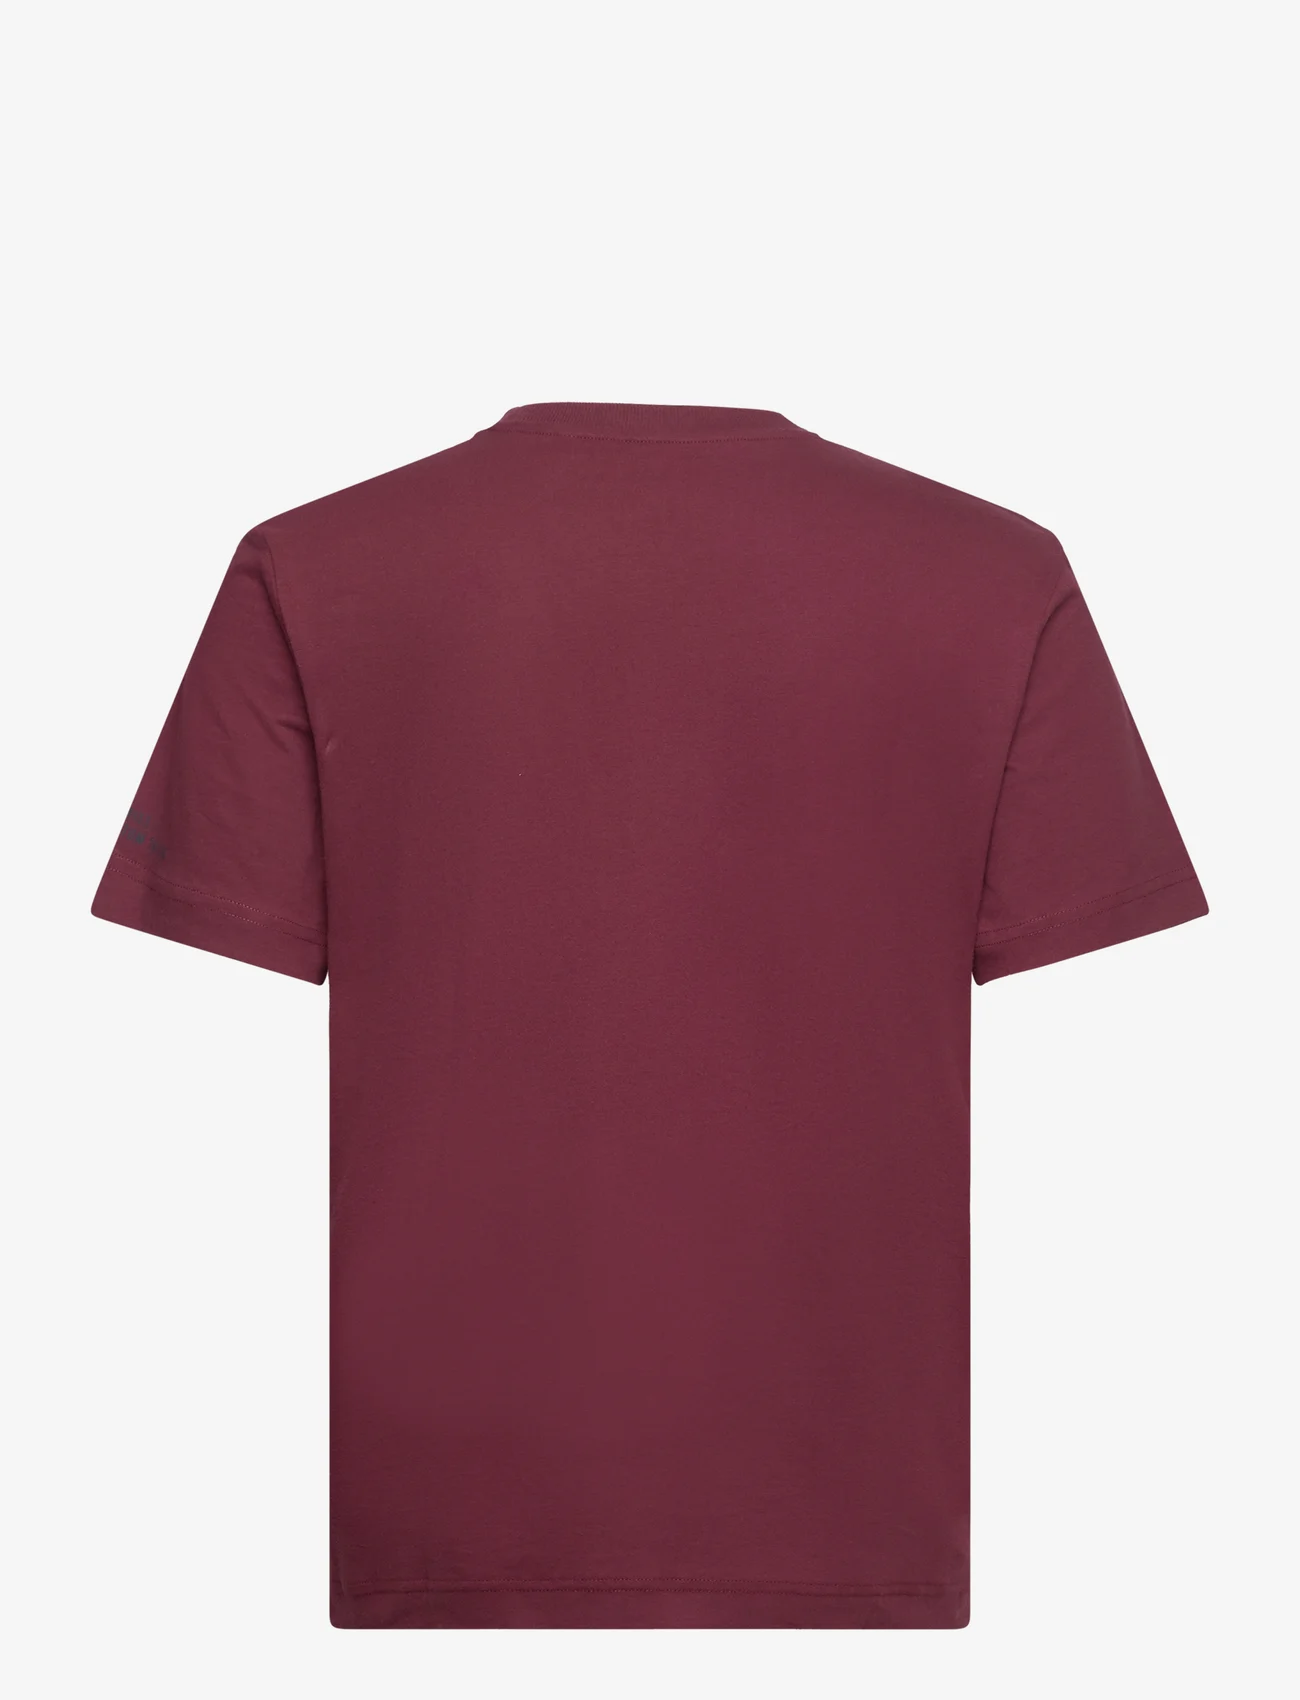 Tom Tailor - printed t-shirt - lowest prices - tawny port red - 1